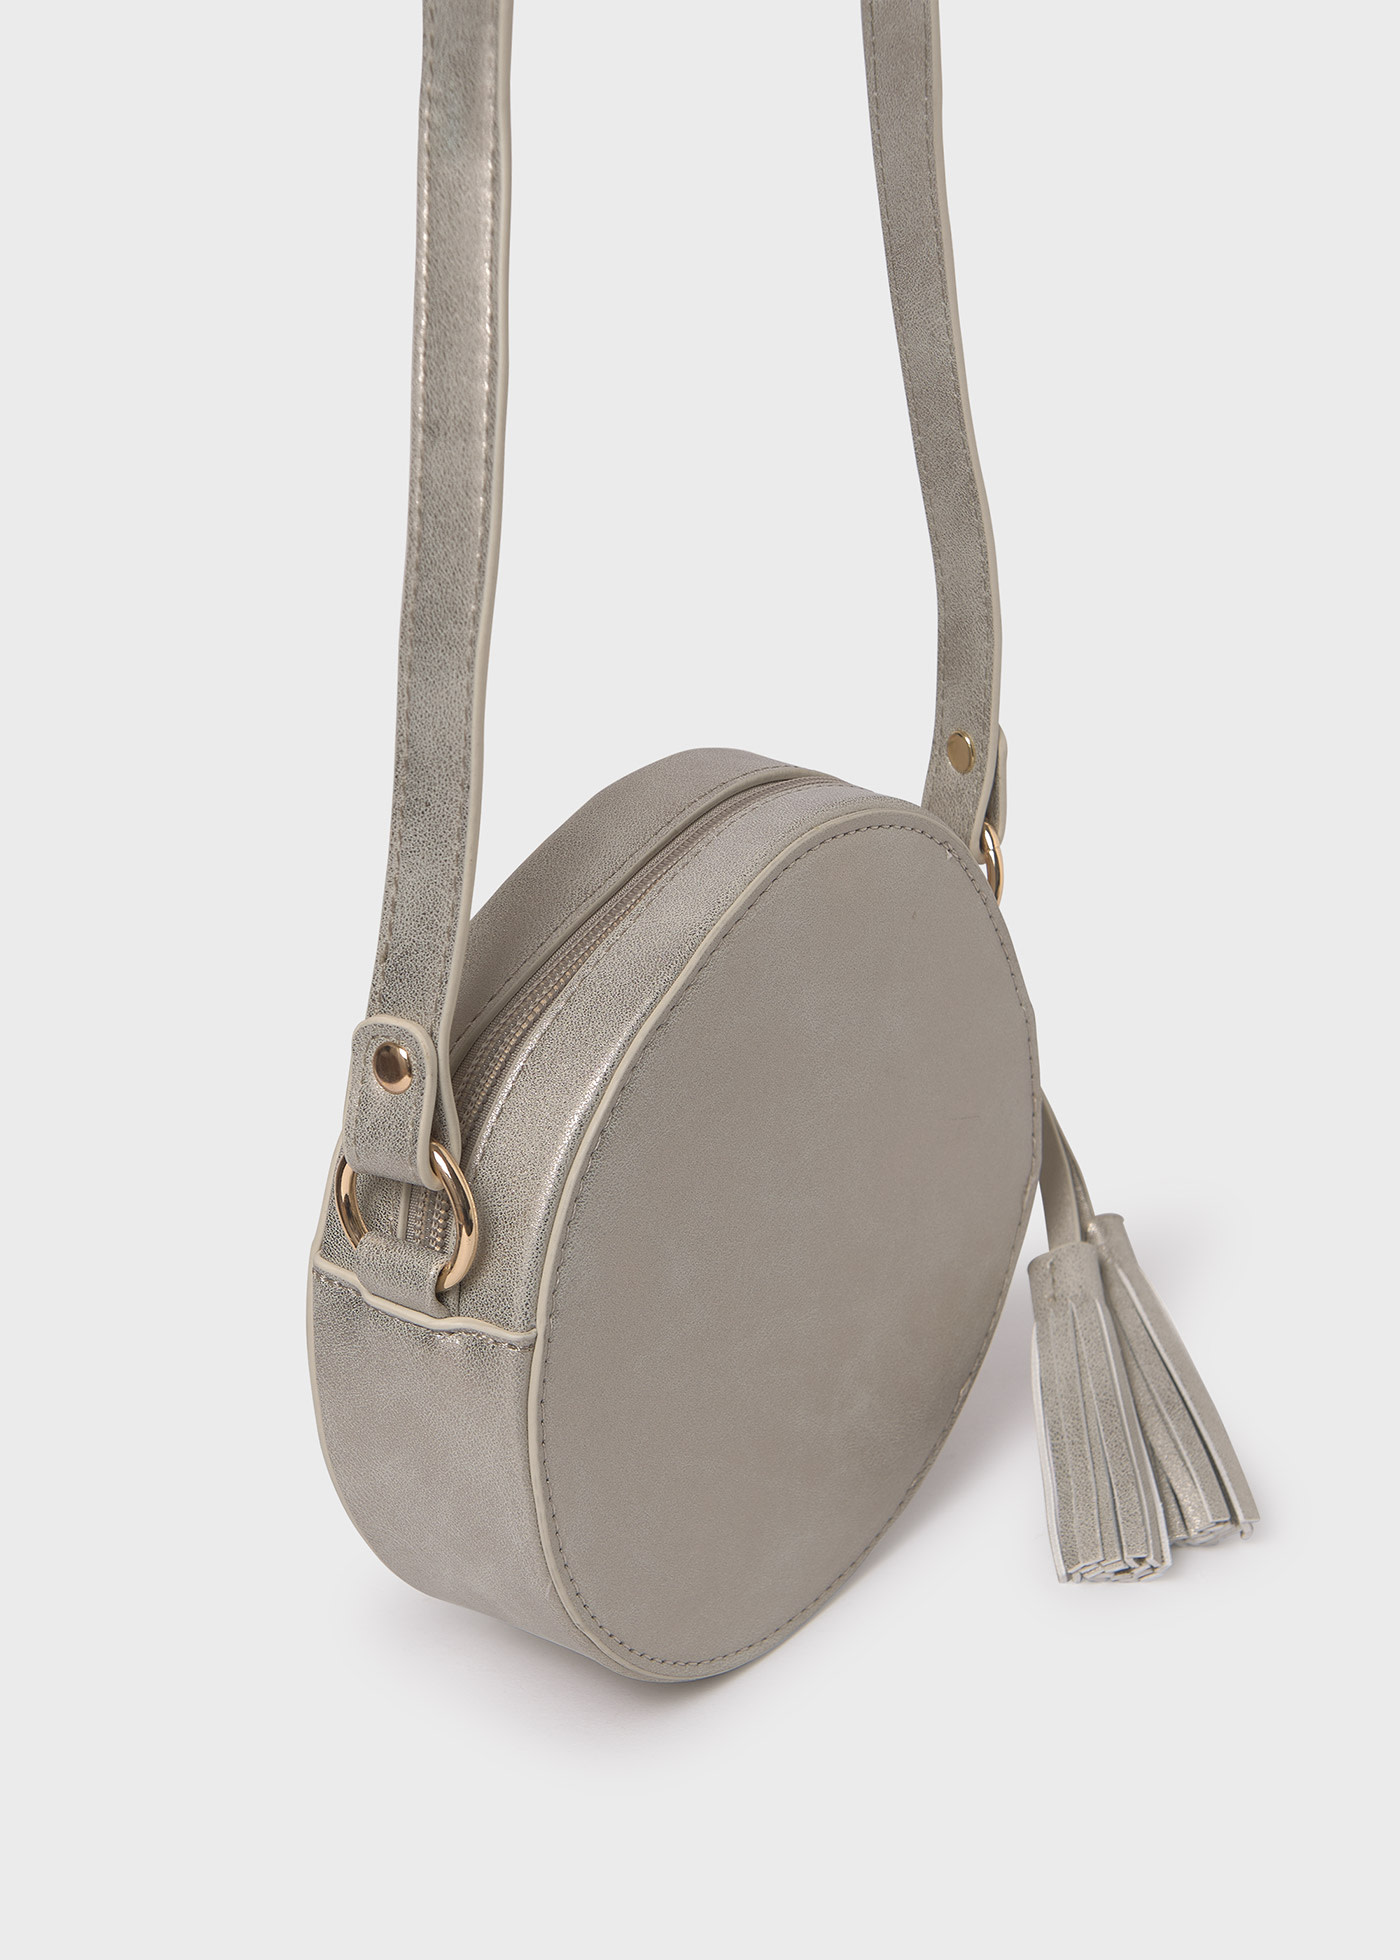 Sac rond fille